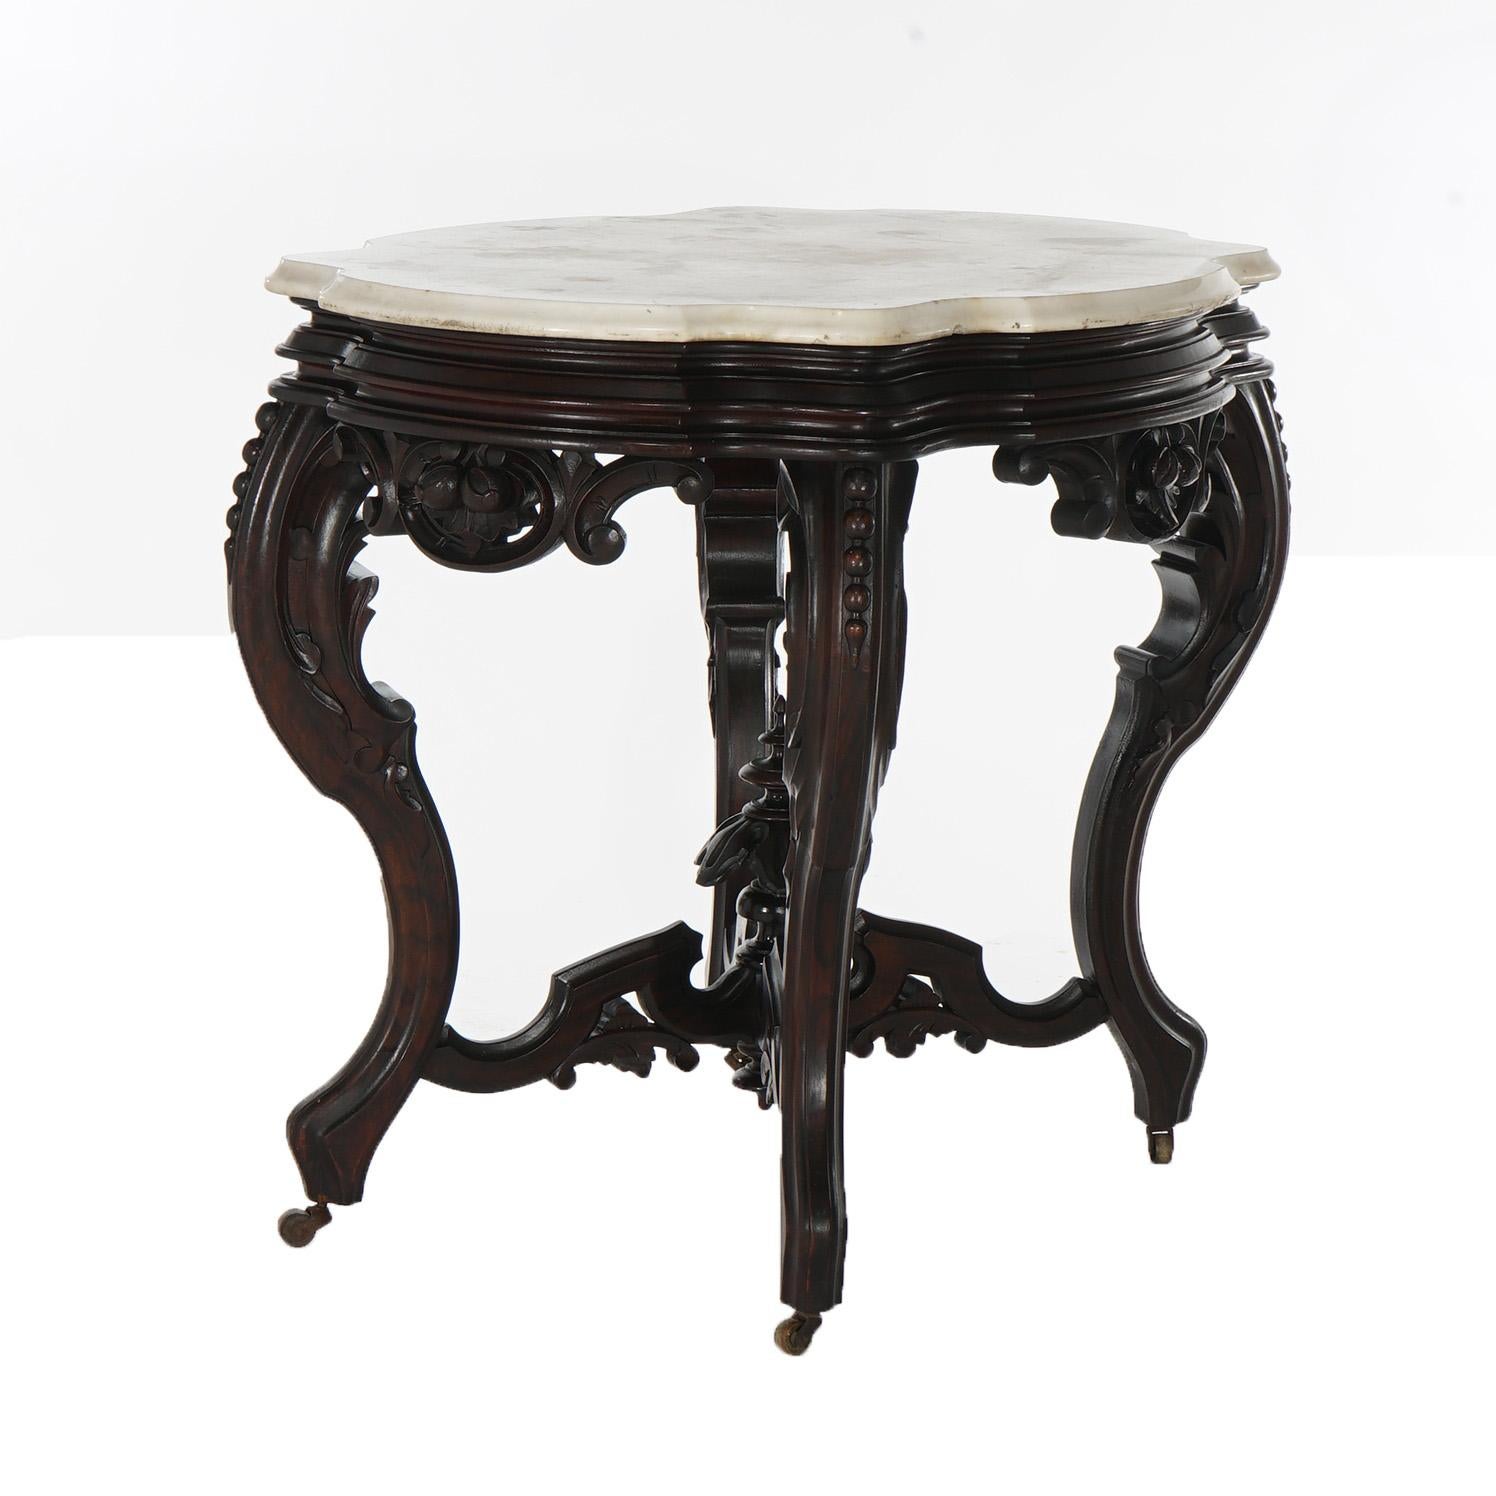 Antique Brooks Victorian Heavily Carved Walnut & Marble Turtle Top Table C1870 For Sale 9